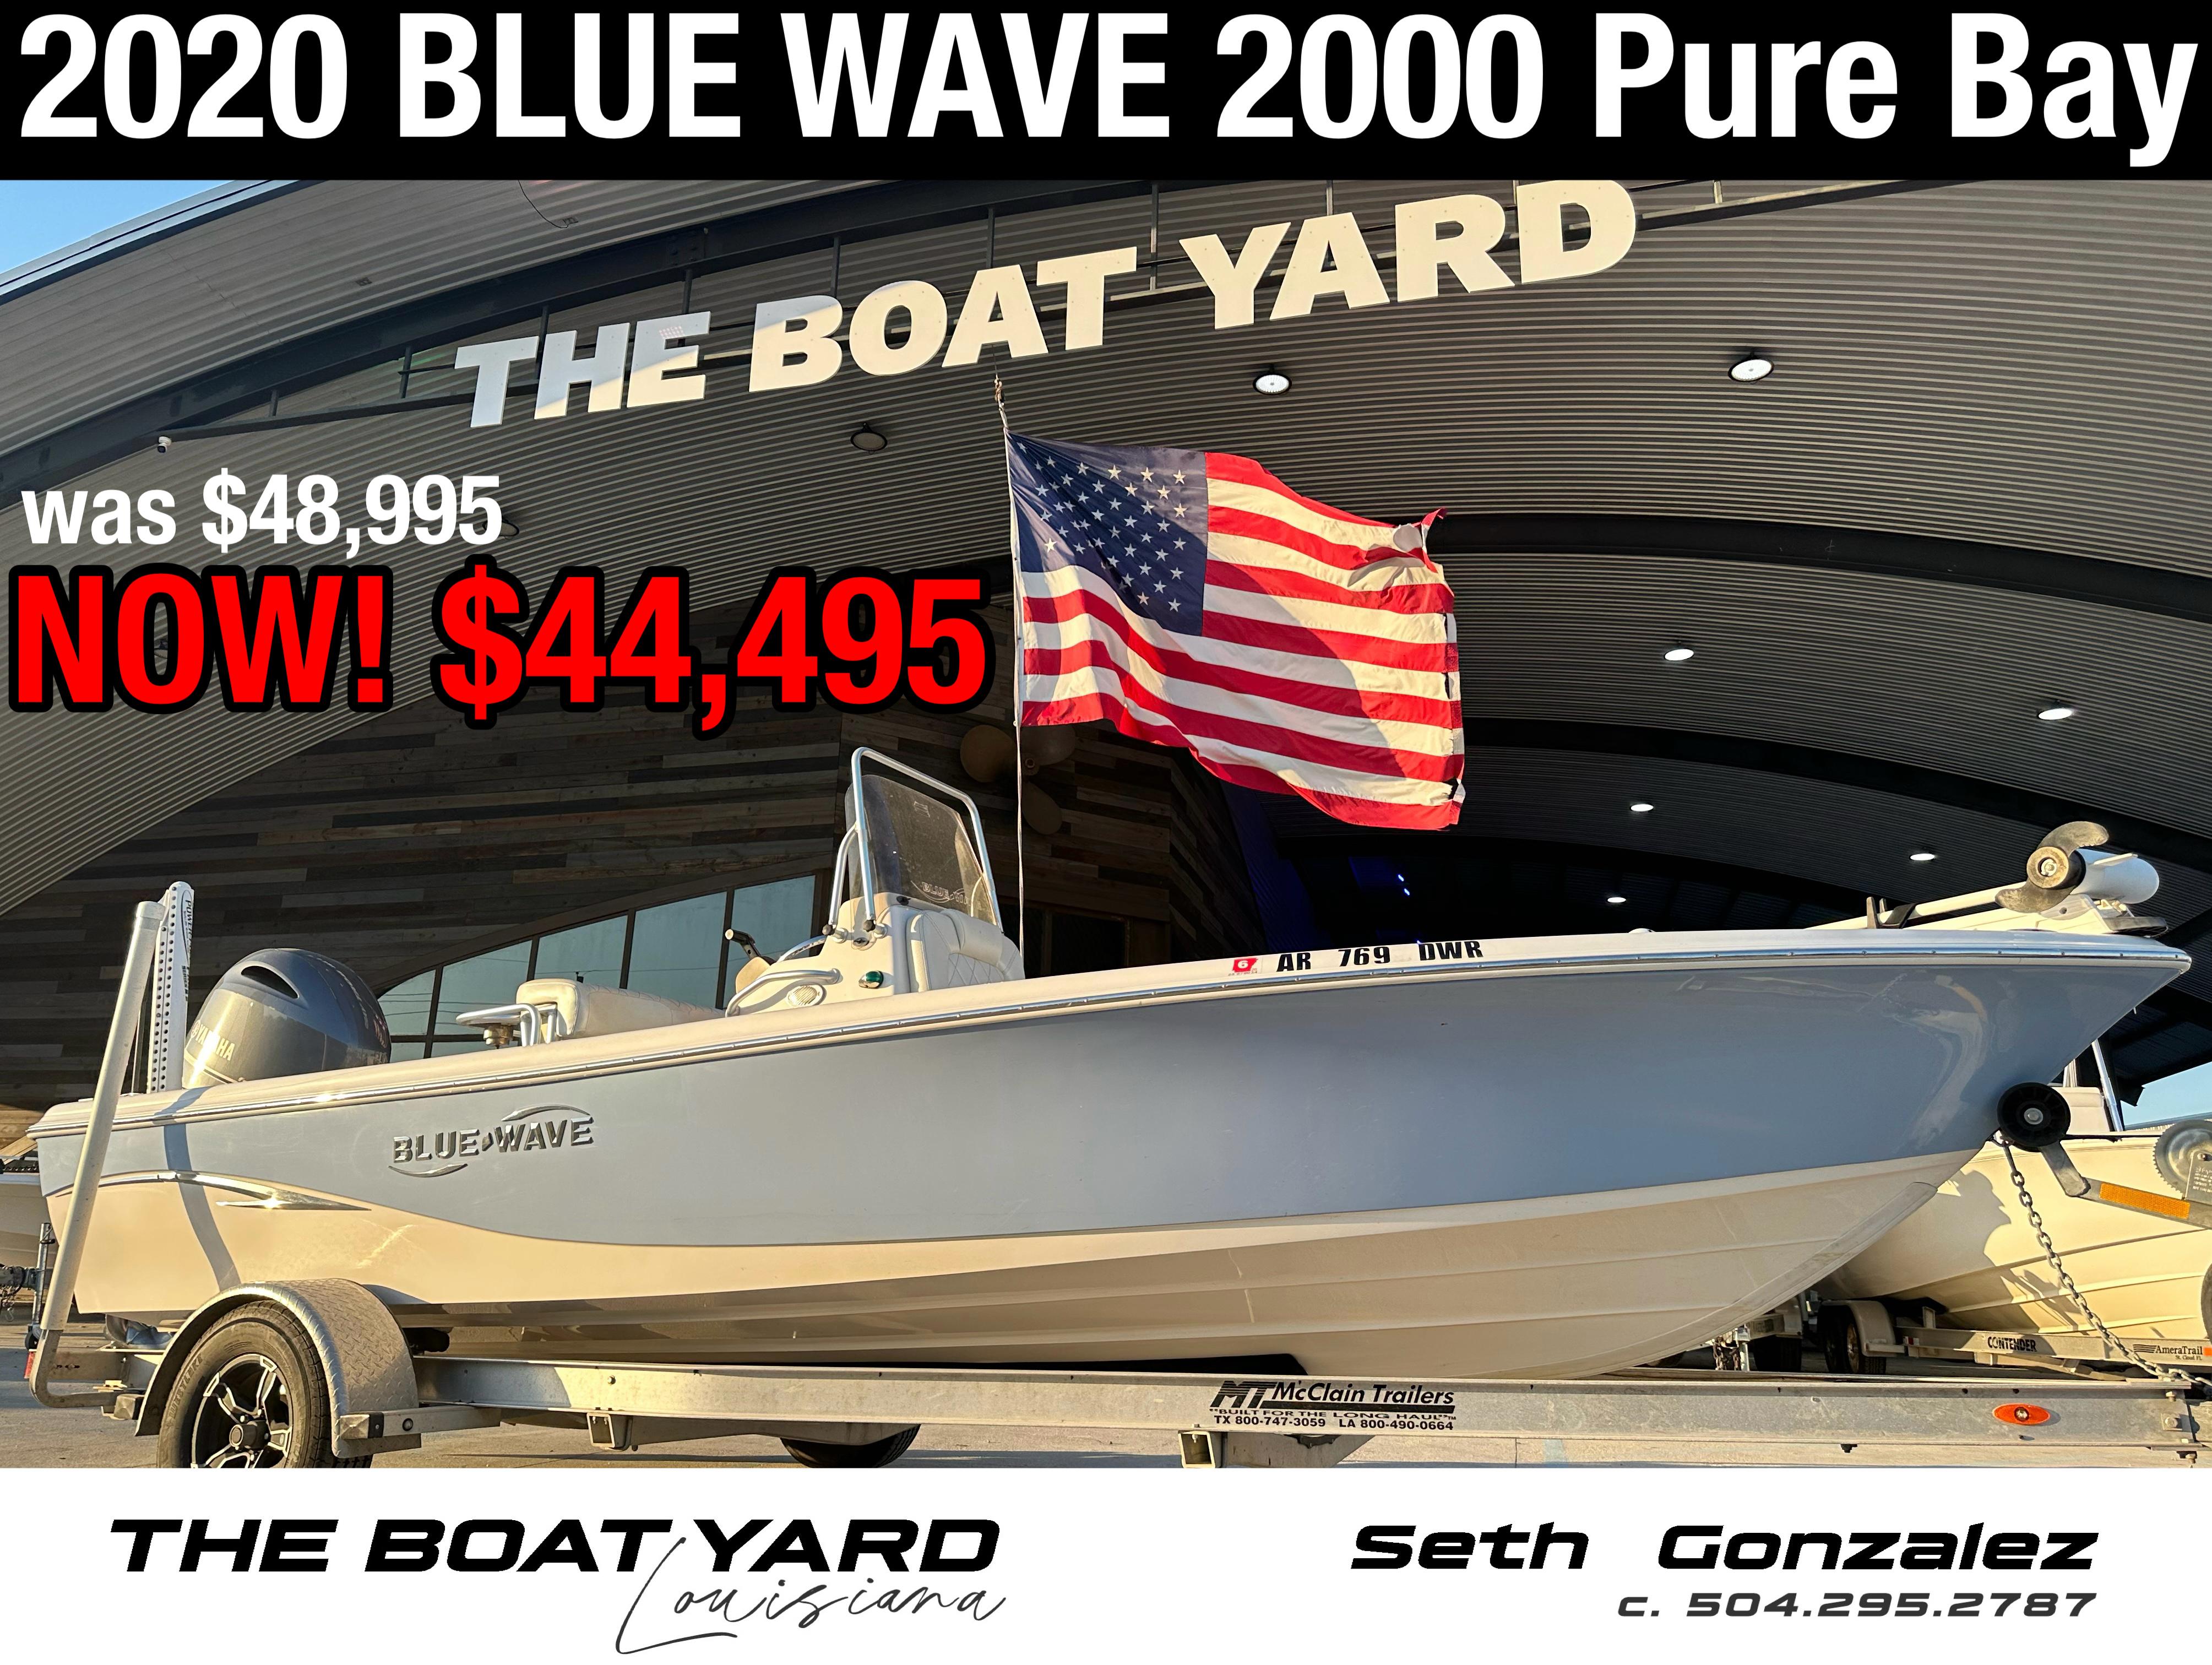 2020 Blue Wave 2000 Pure Bay